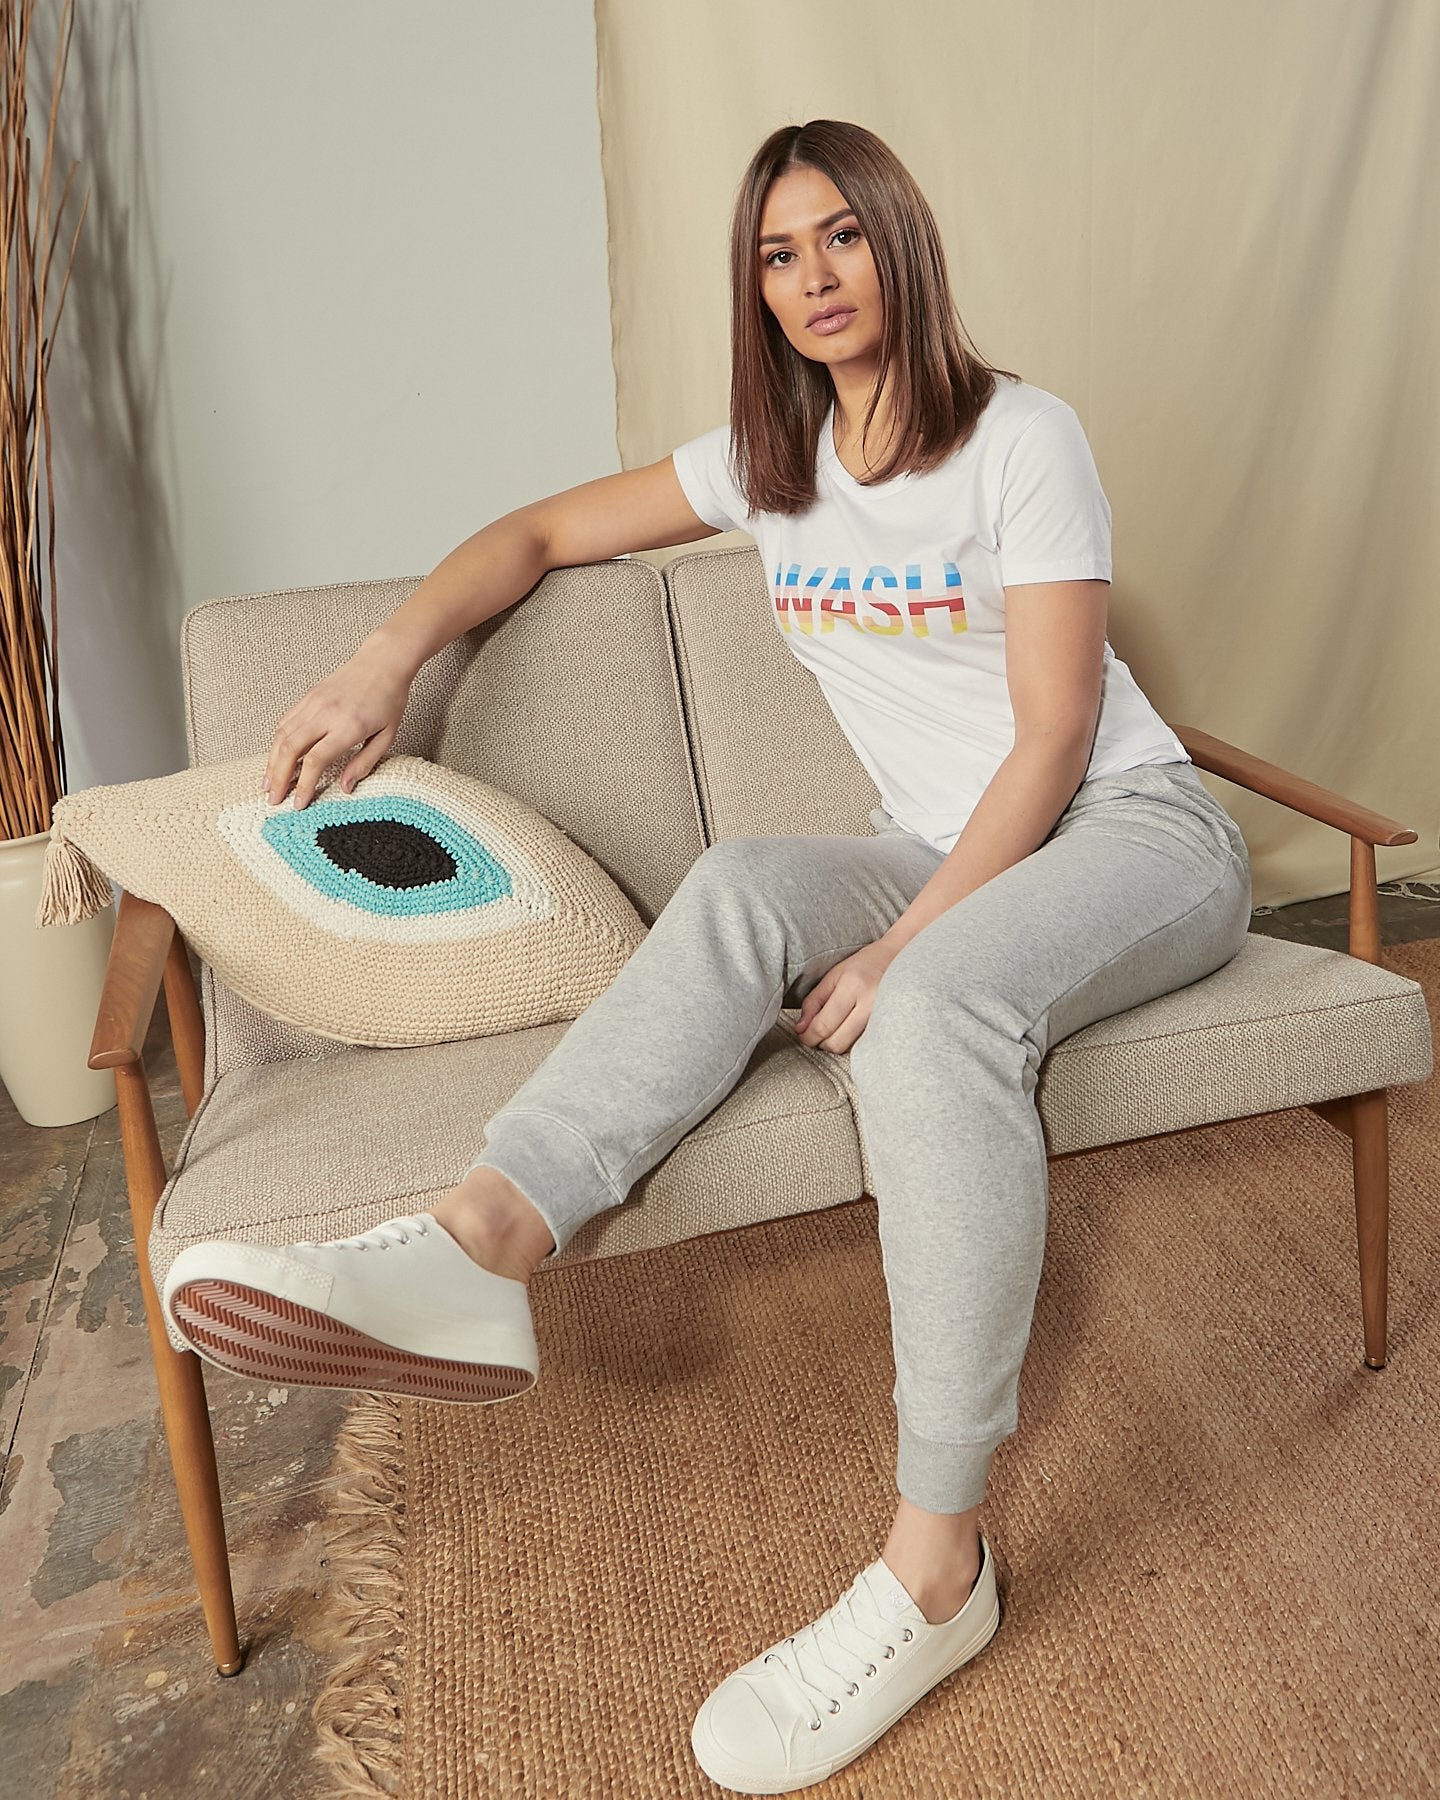 Lounging on sofa wearing rainbow-coloured 'WASH' motif cotton t-shirt in white.